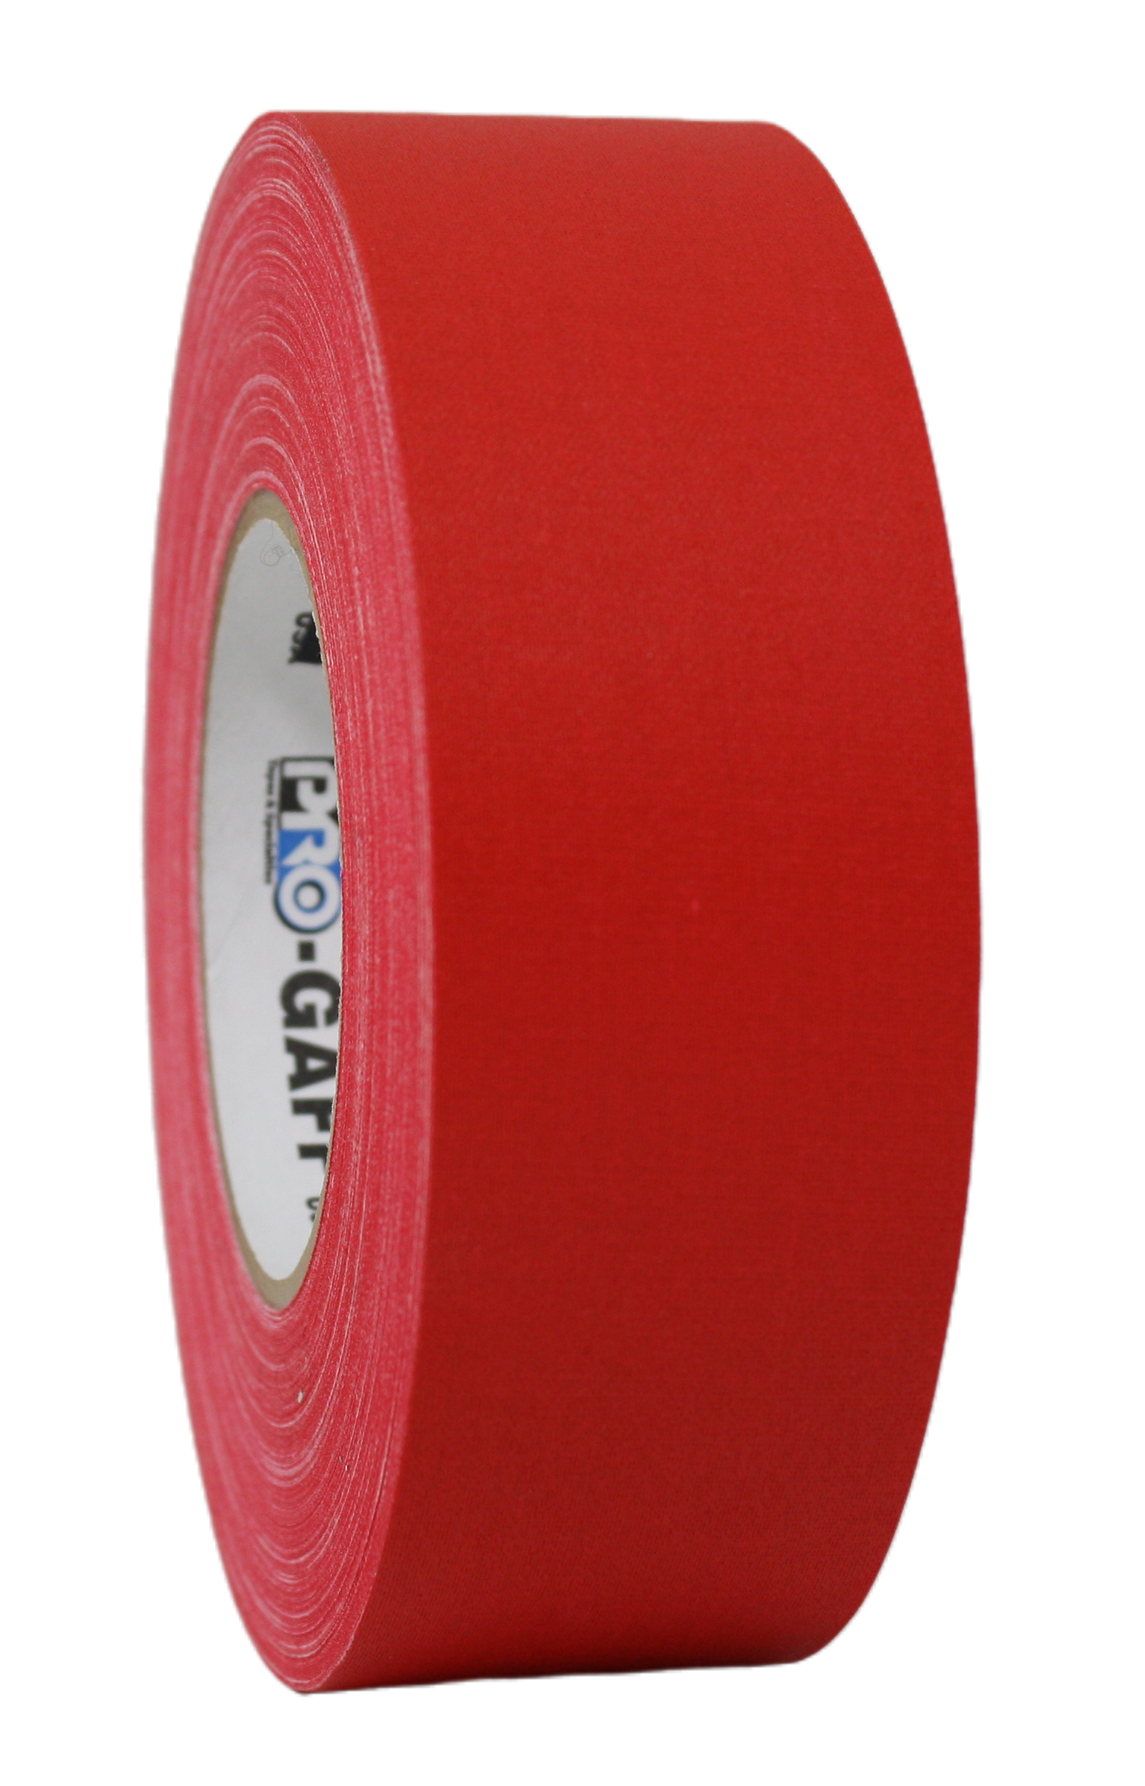 Pro Gaff 2" 50m roll, red, side view